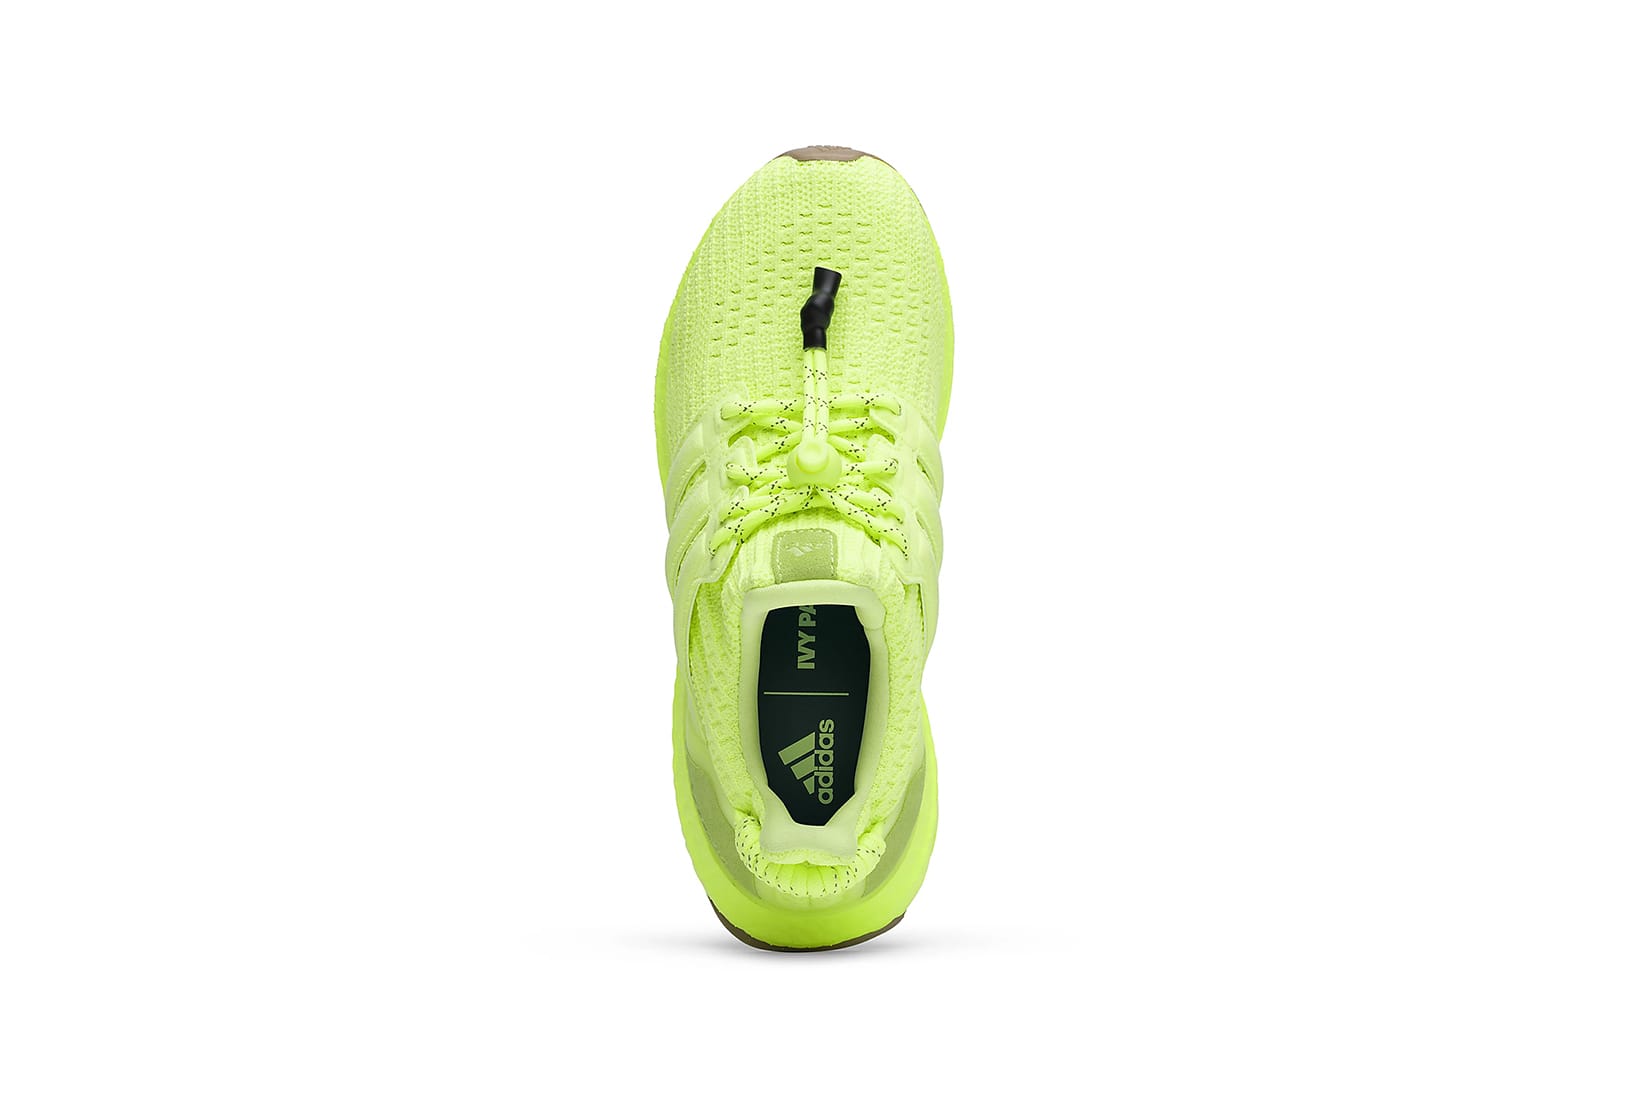 adidas shoes lime green